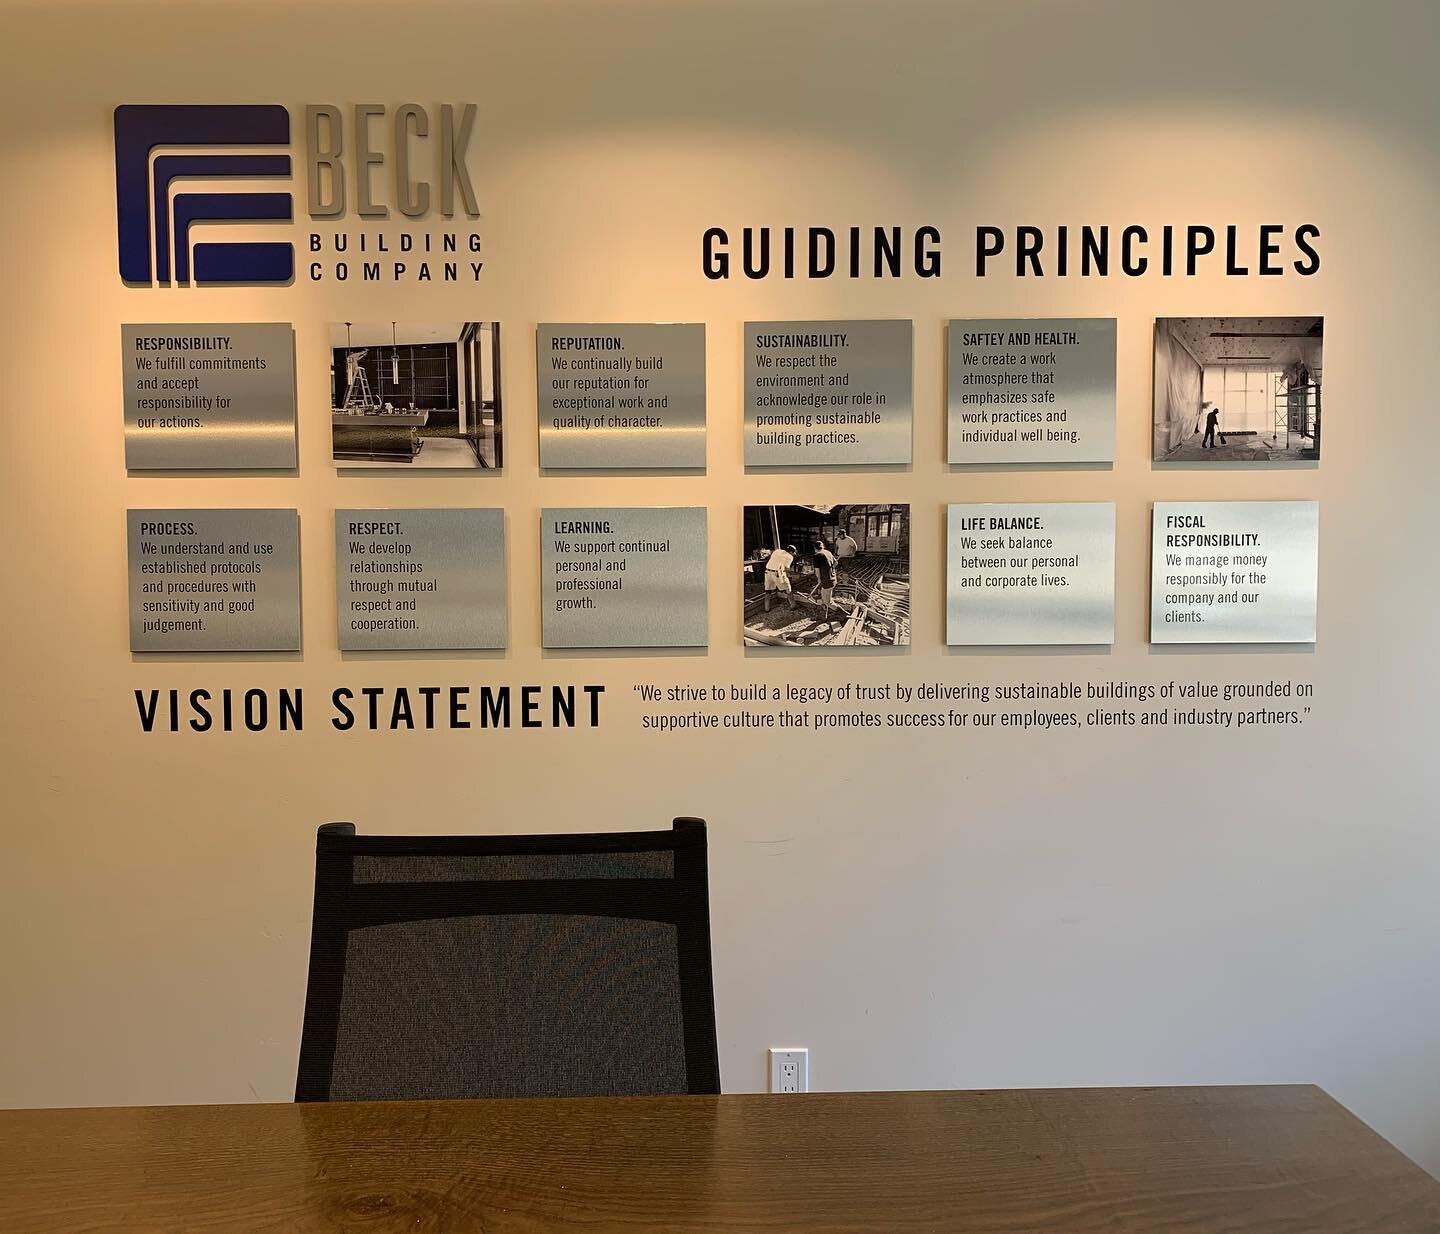 A creative way to show your clients  what your values are. This wall graphics was a fun one. We love creating interesting ways for you to present your business to your clients.
.
 @beckbuilds 
.
.
.
.
.

.
.
.
#beckbuildingcompany #avon #wallwrap #wa